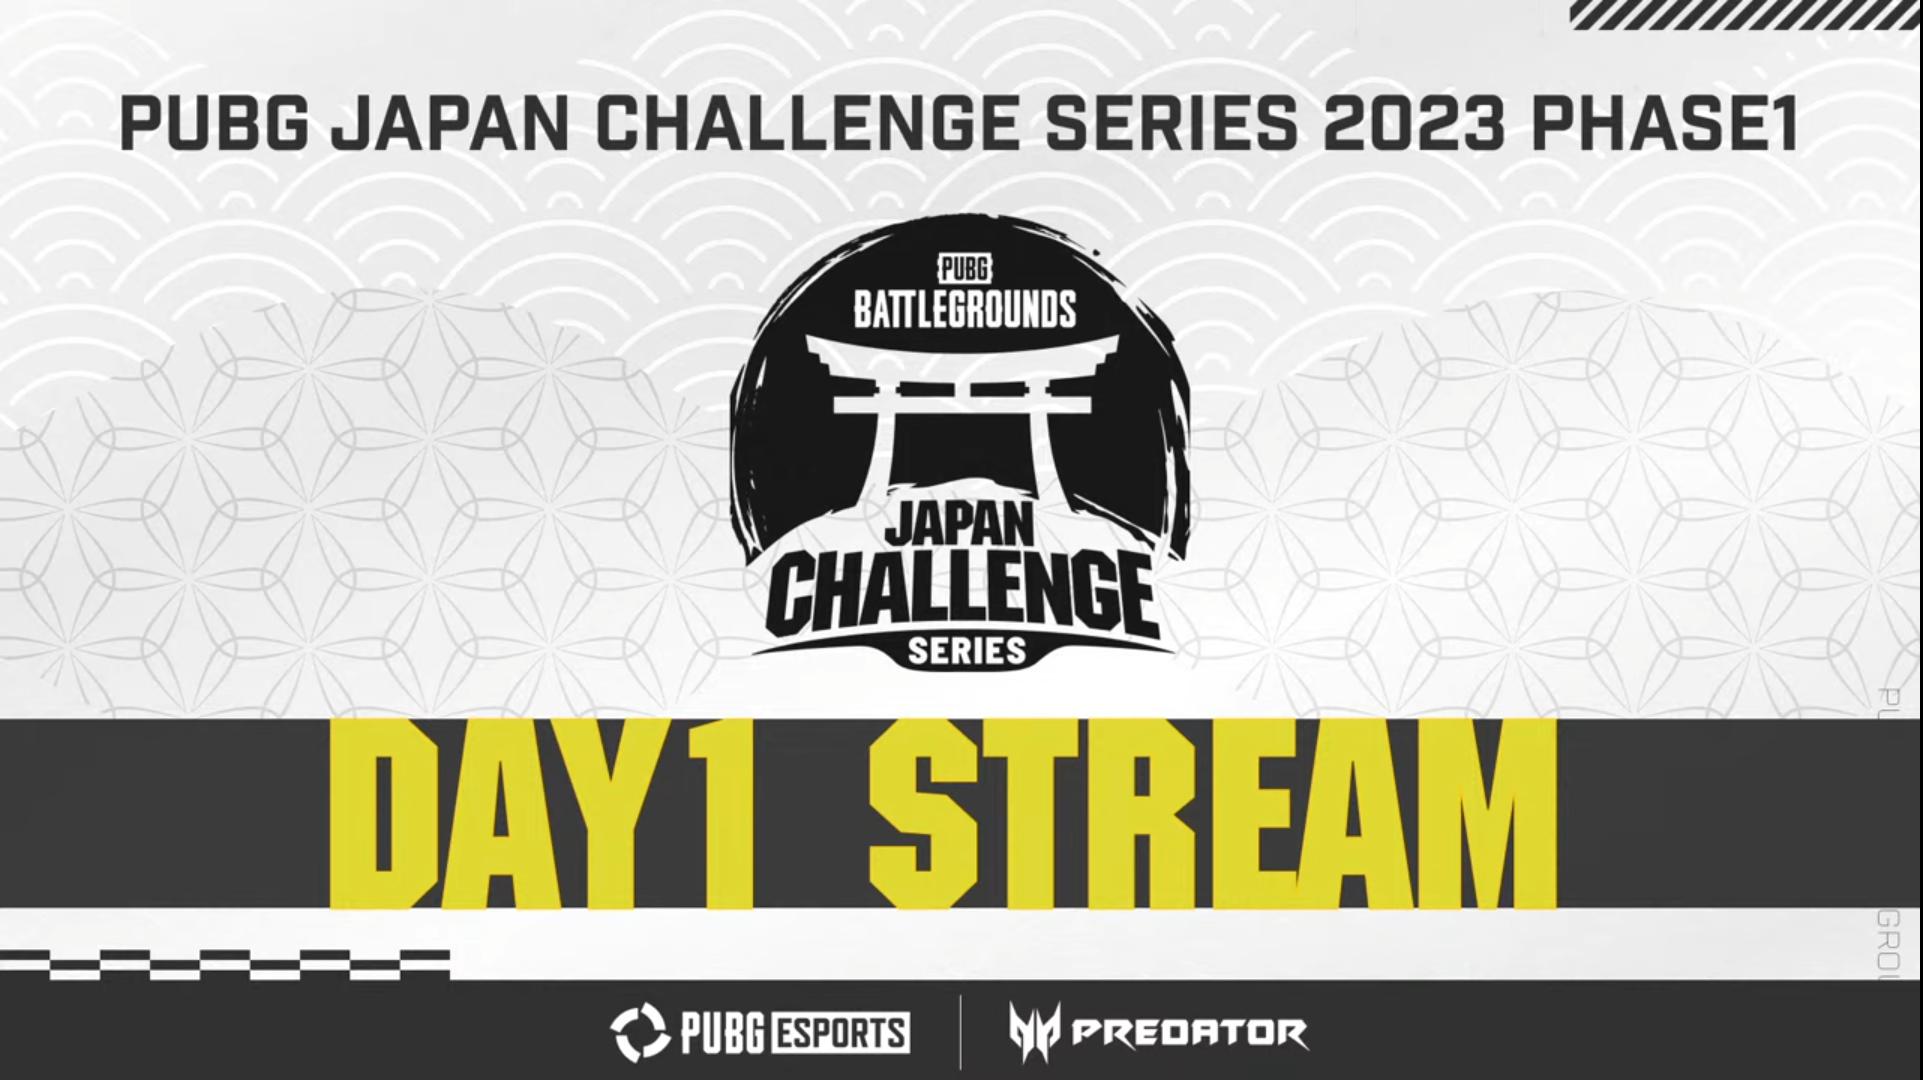 PUBG JAPAN CHALLENGE SERIES 2023 Phase1 feature image